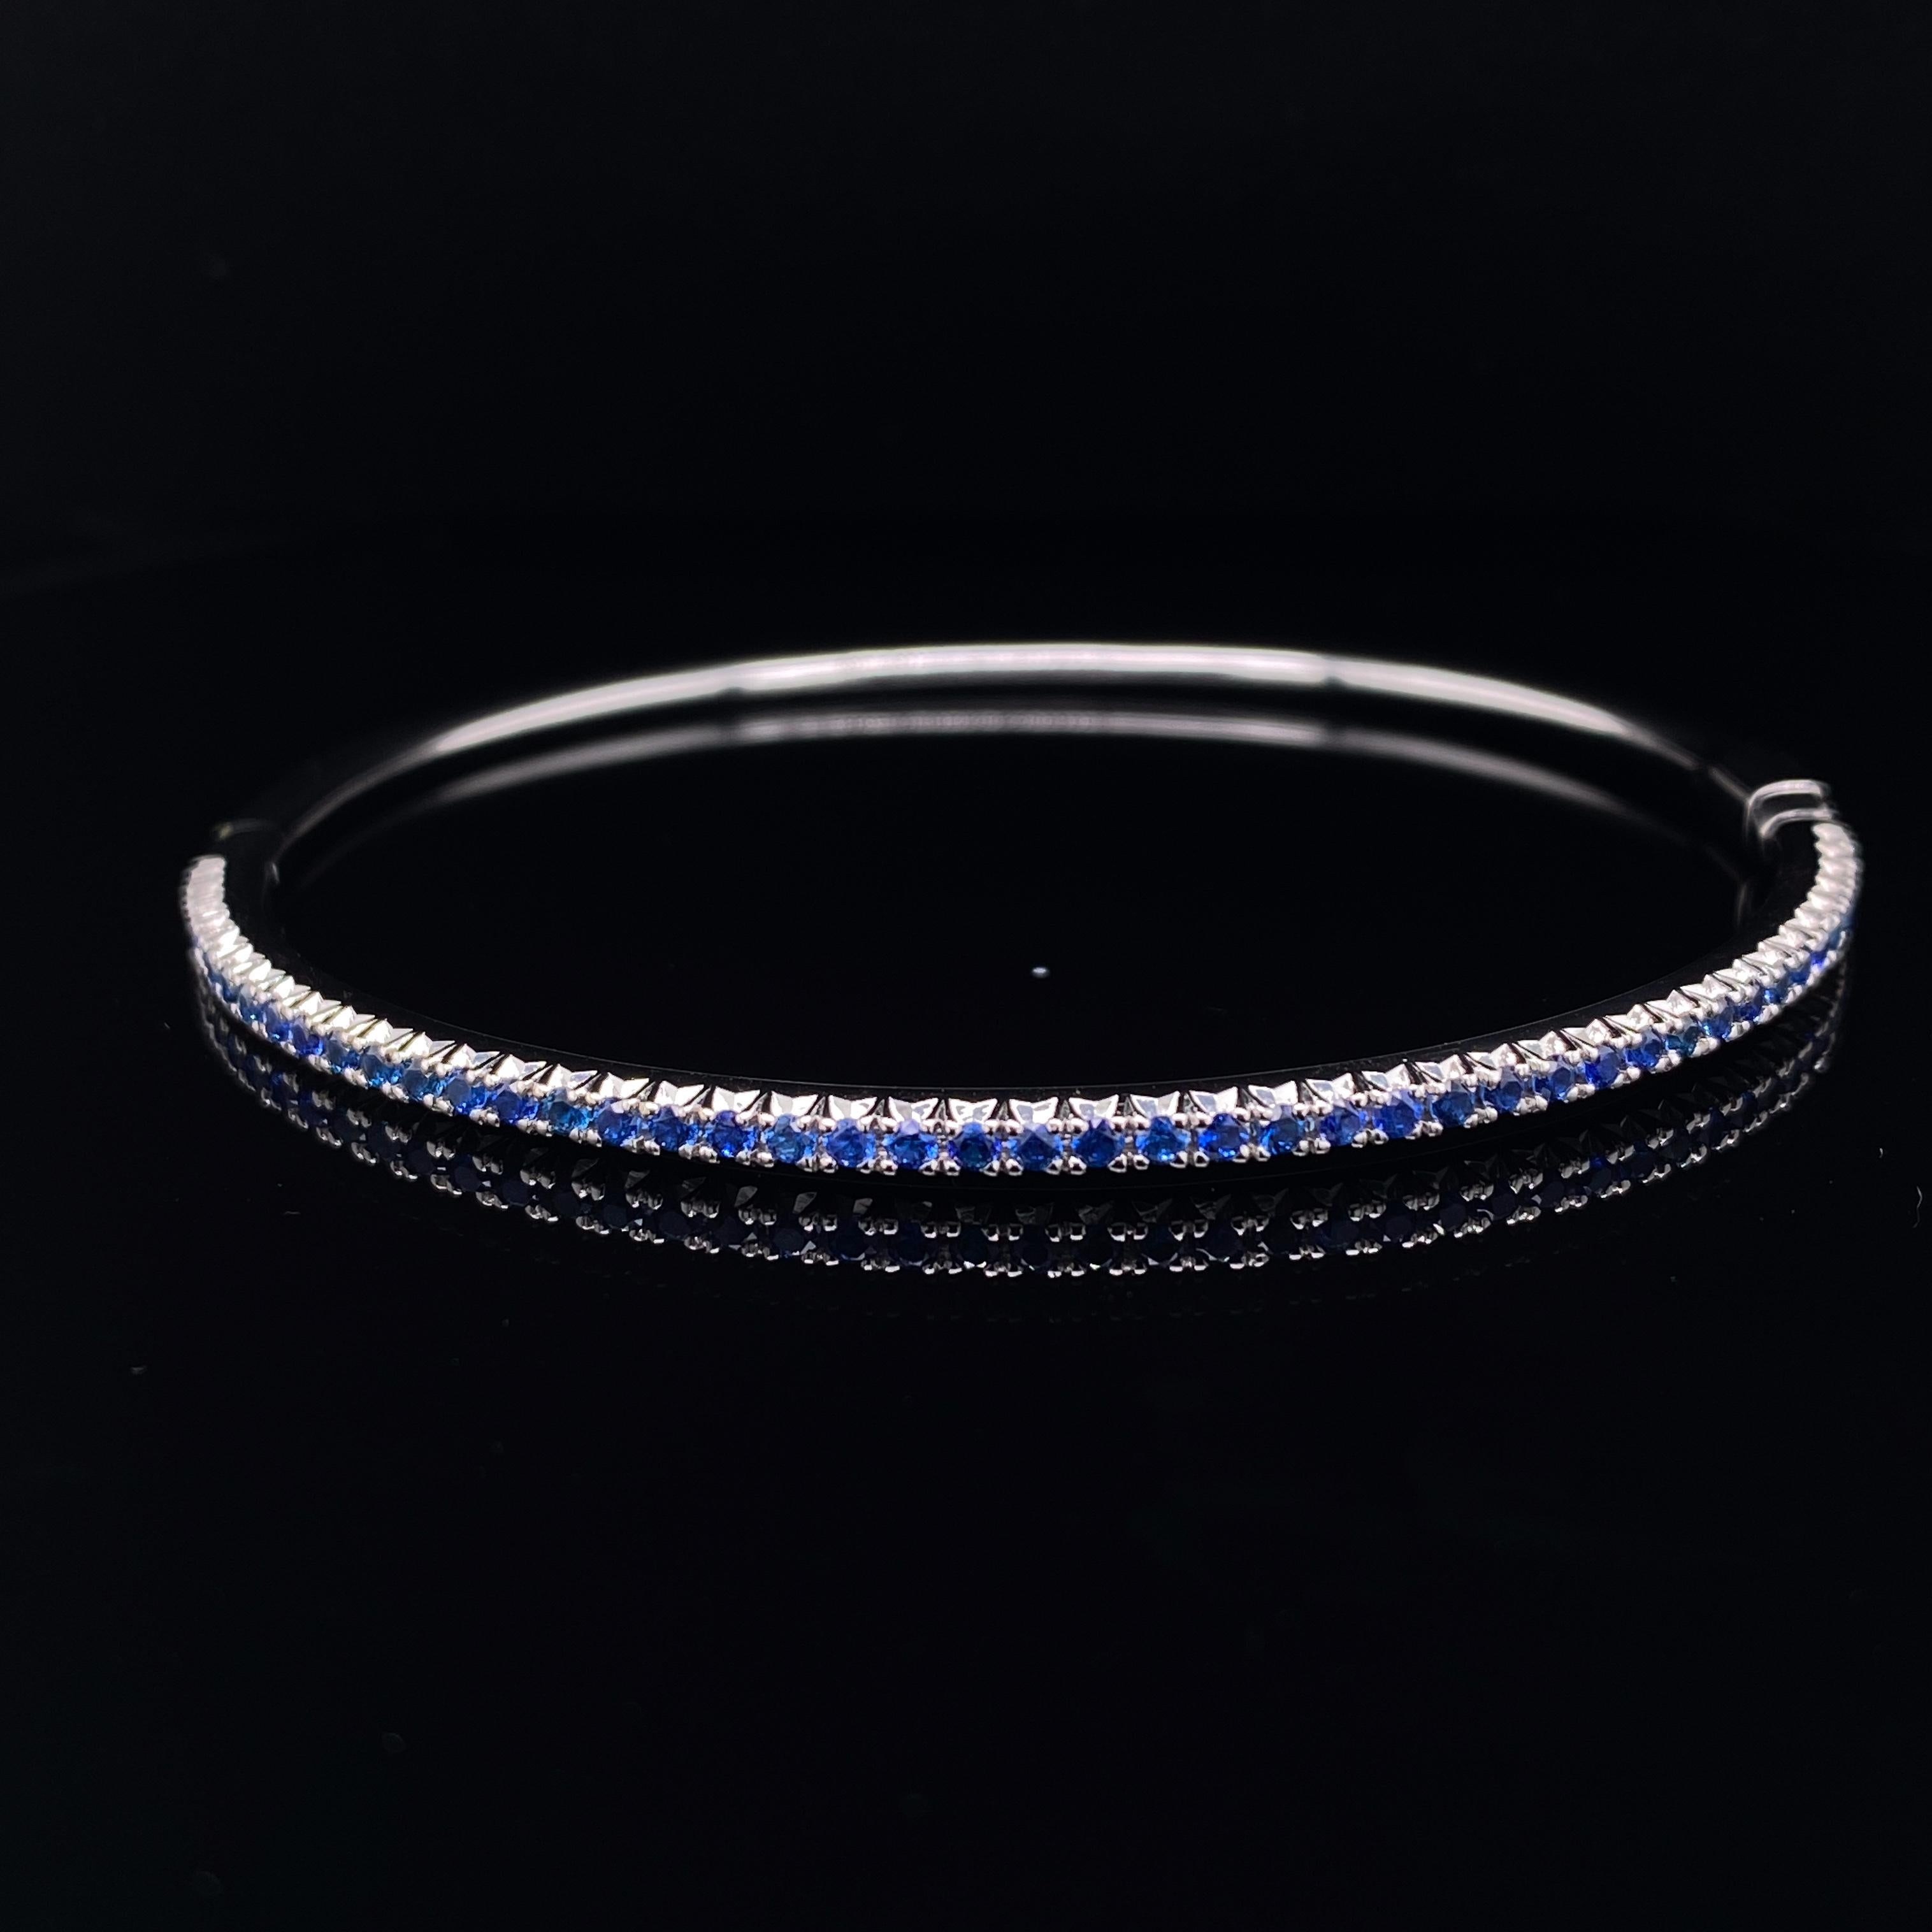 A Tiffany sapphire bangle in 18 karat white gold.

This slim elegant gold bangle bracelet has a hinged fitting and is claw set to its top half with rich, bright deep hued sapphires.

Its pared back design places all focus on the sapphires, allowing